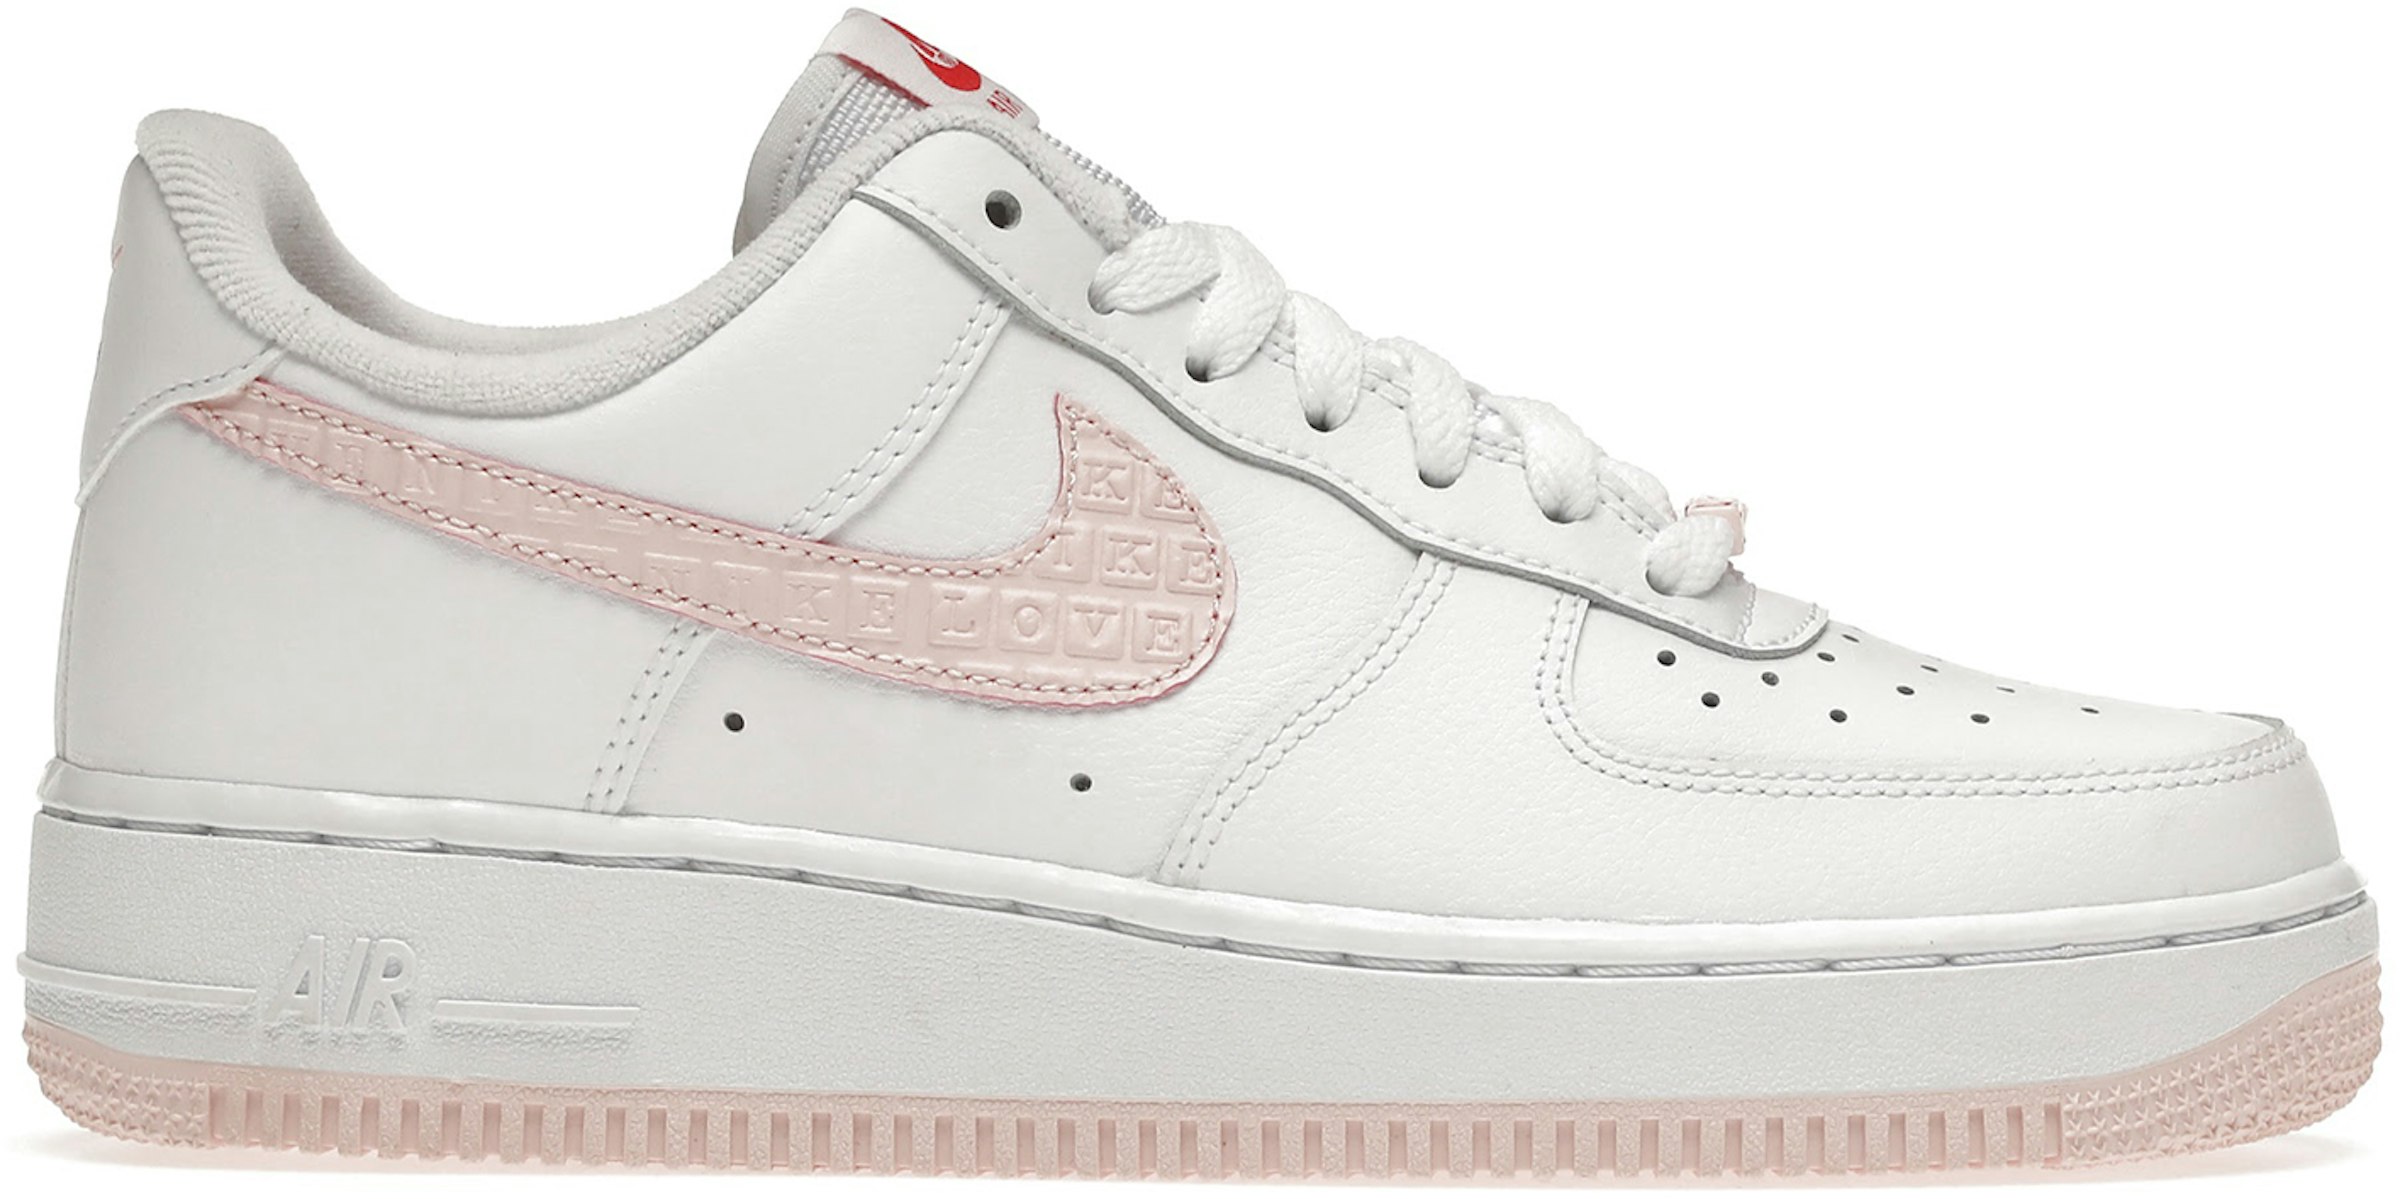 No esencial Grillo Canoa Nike Air Force 1 Low VD Valentine's Day (2022) (Women's) - DQ9320-100 - US